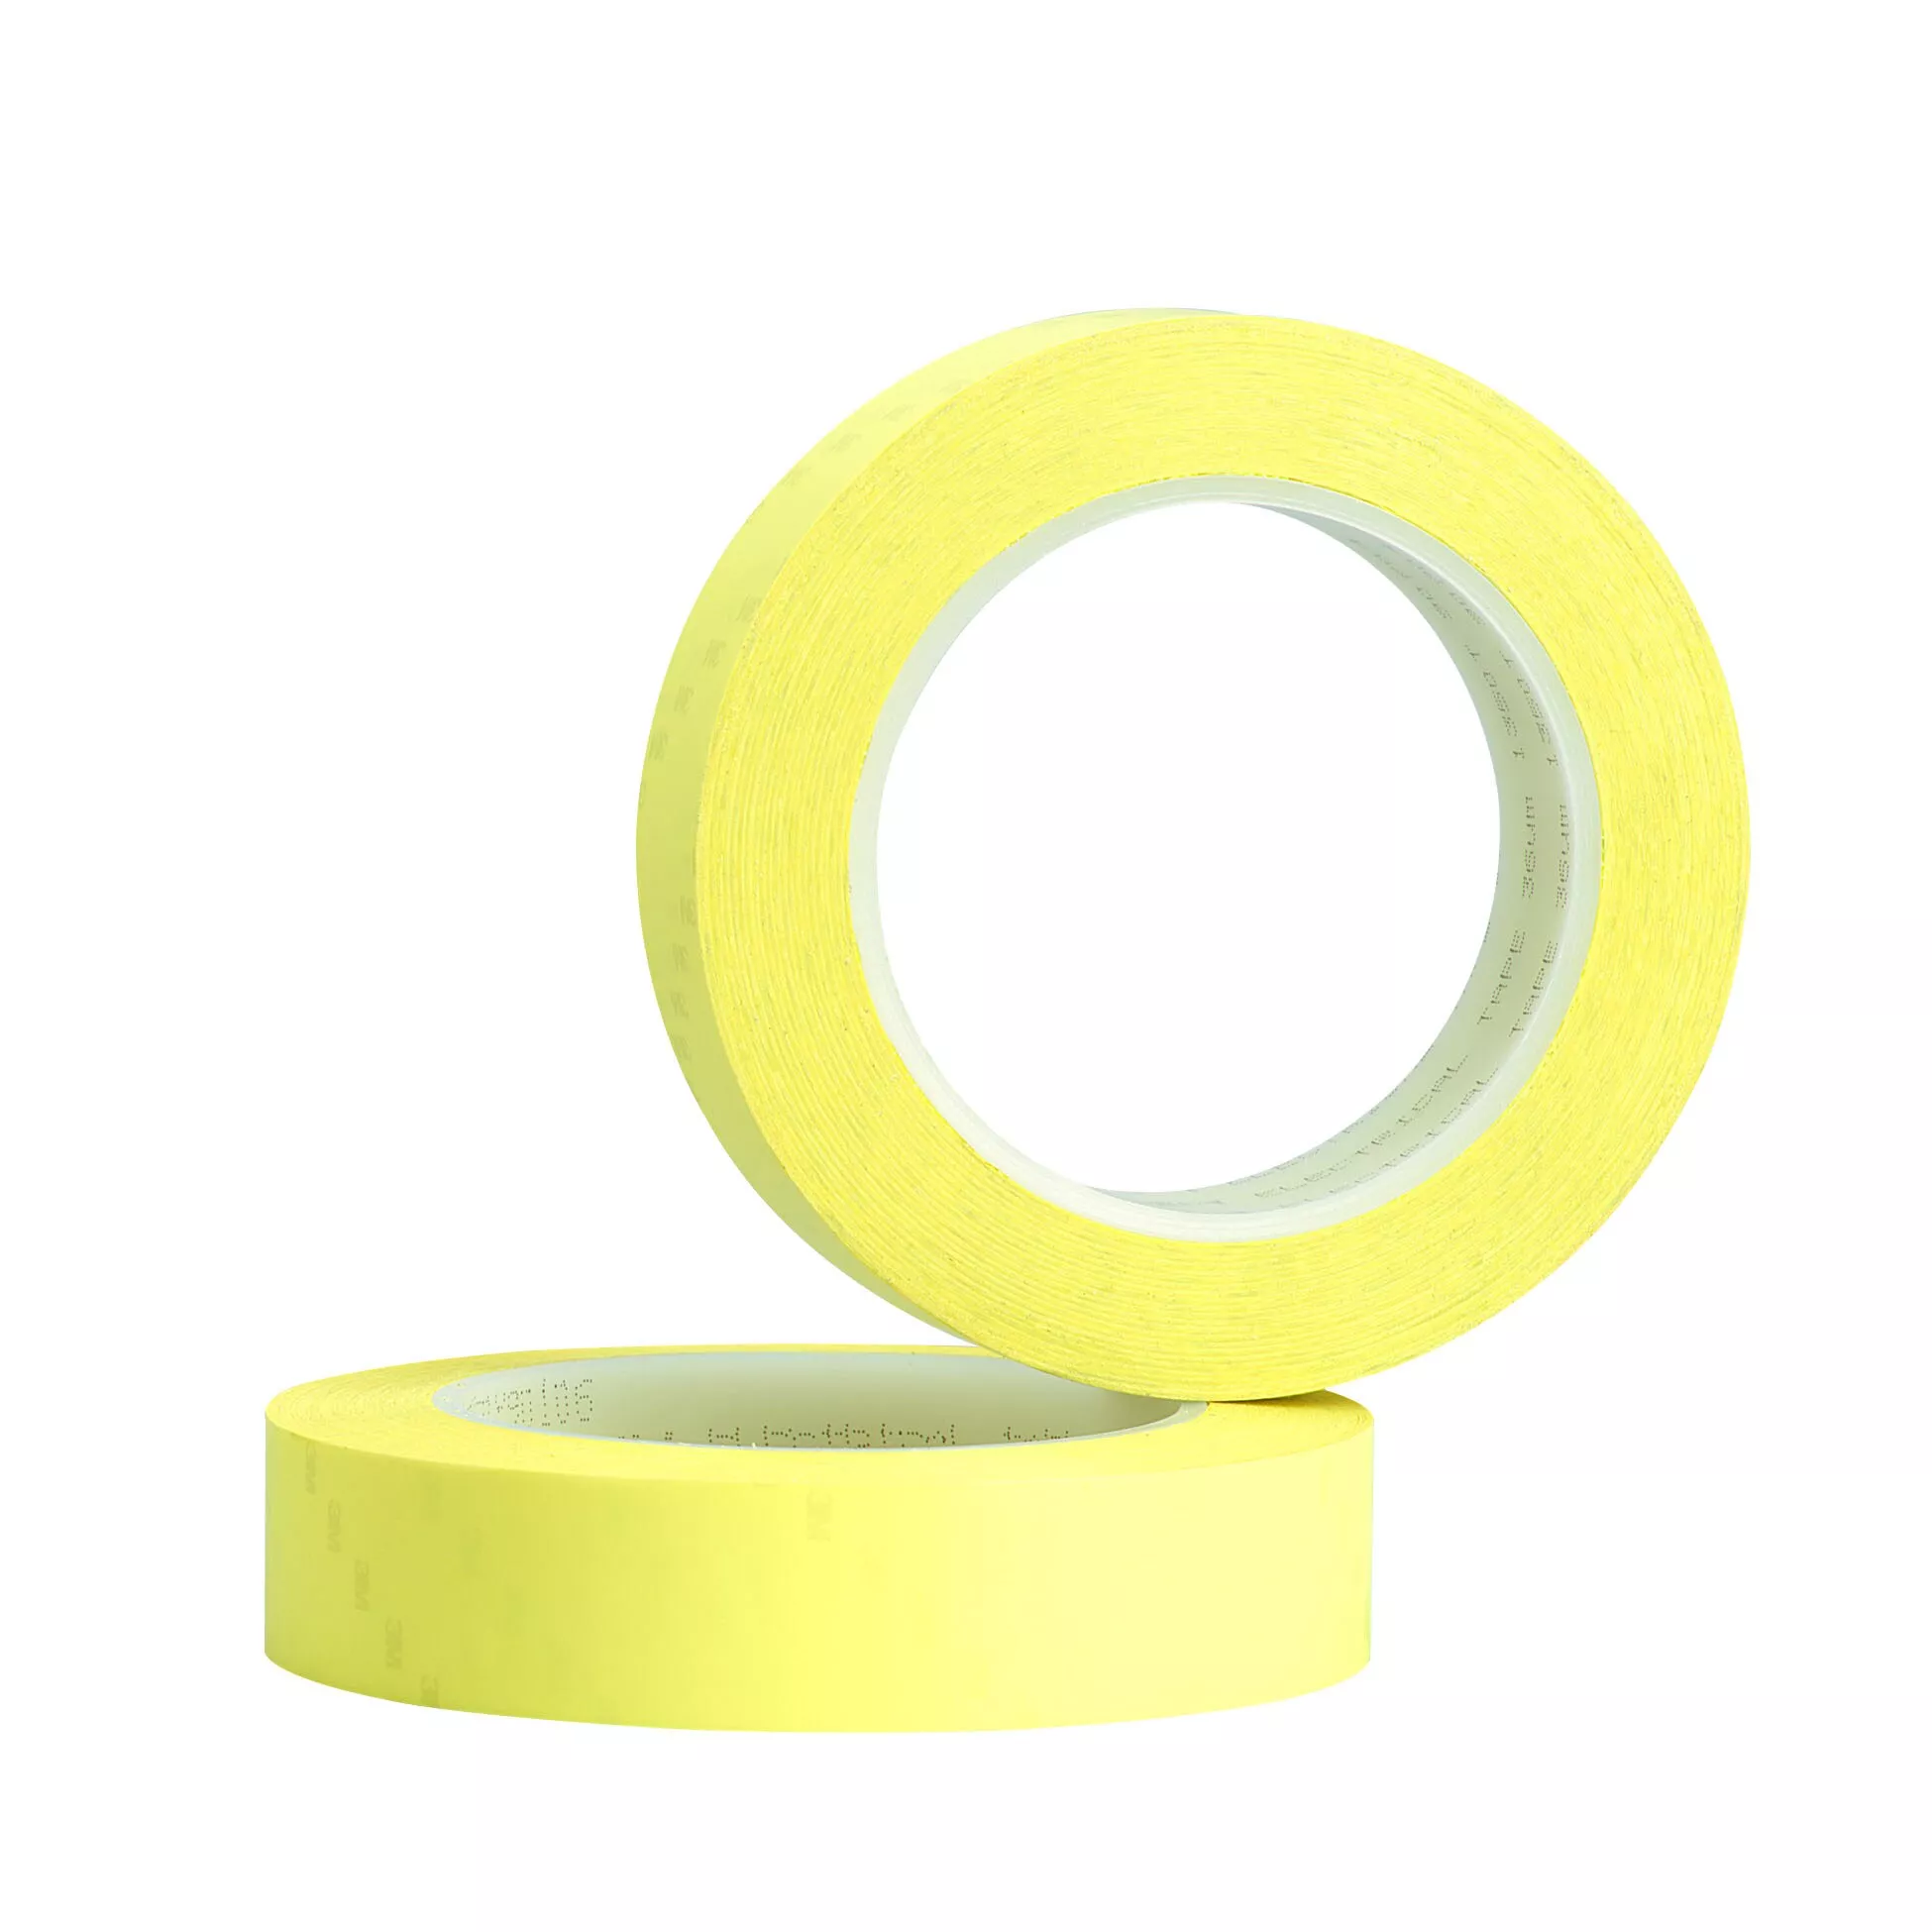 SKU 7100088176 | 3M™ Polyester Film Electrical Tape 1350F-2